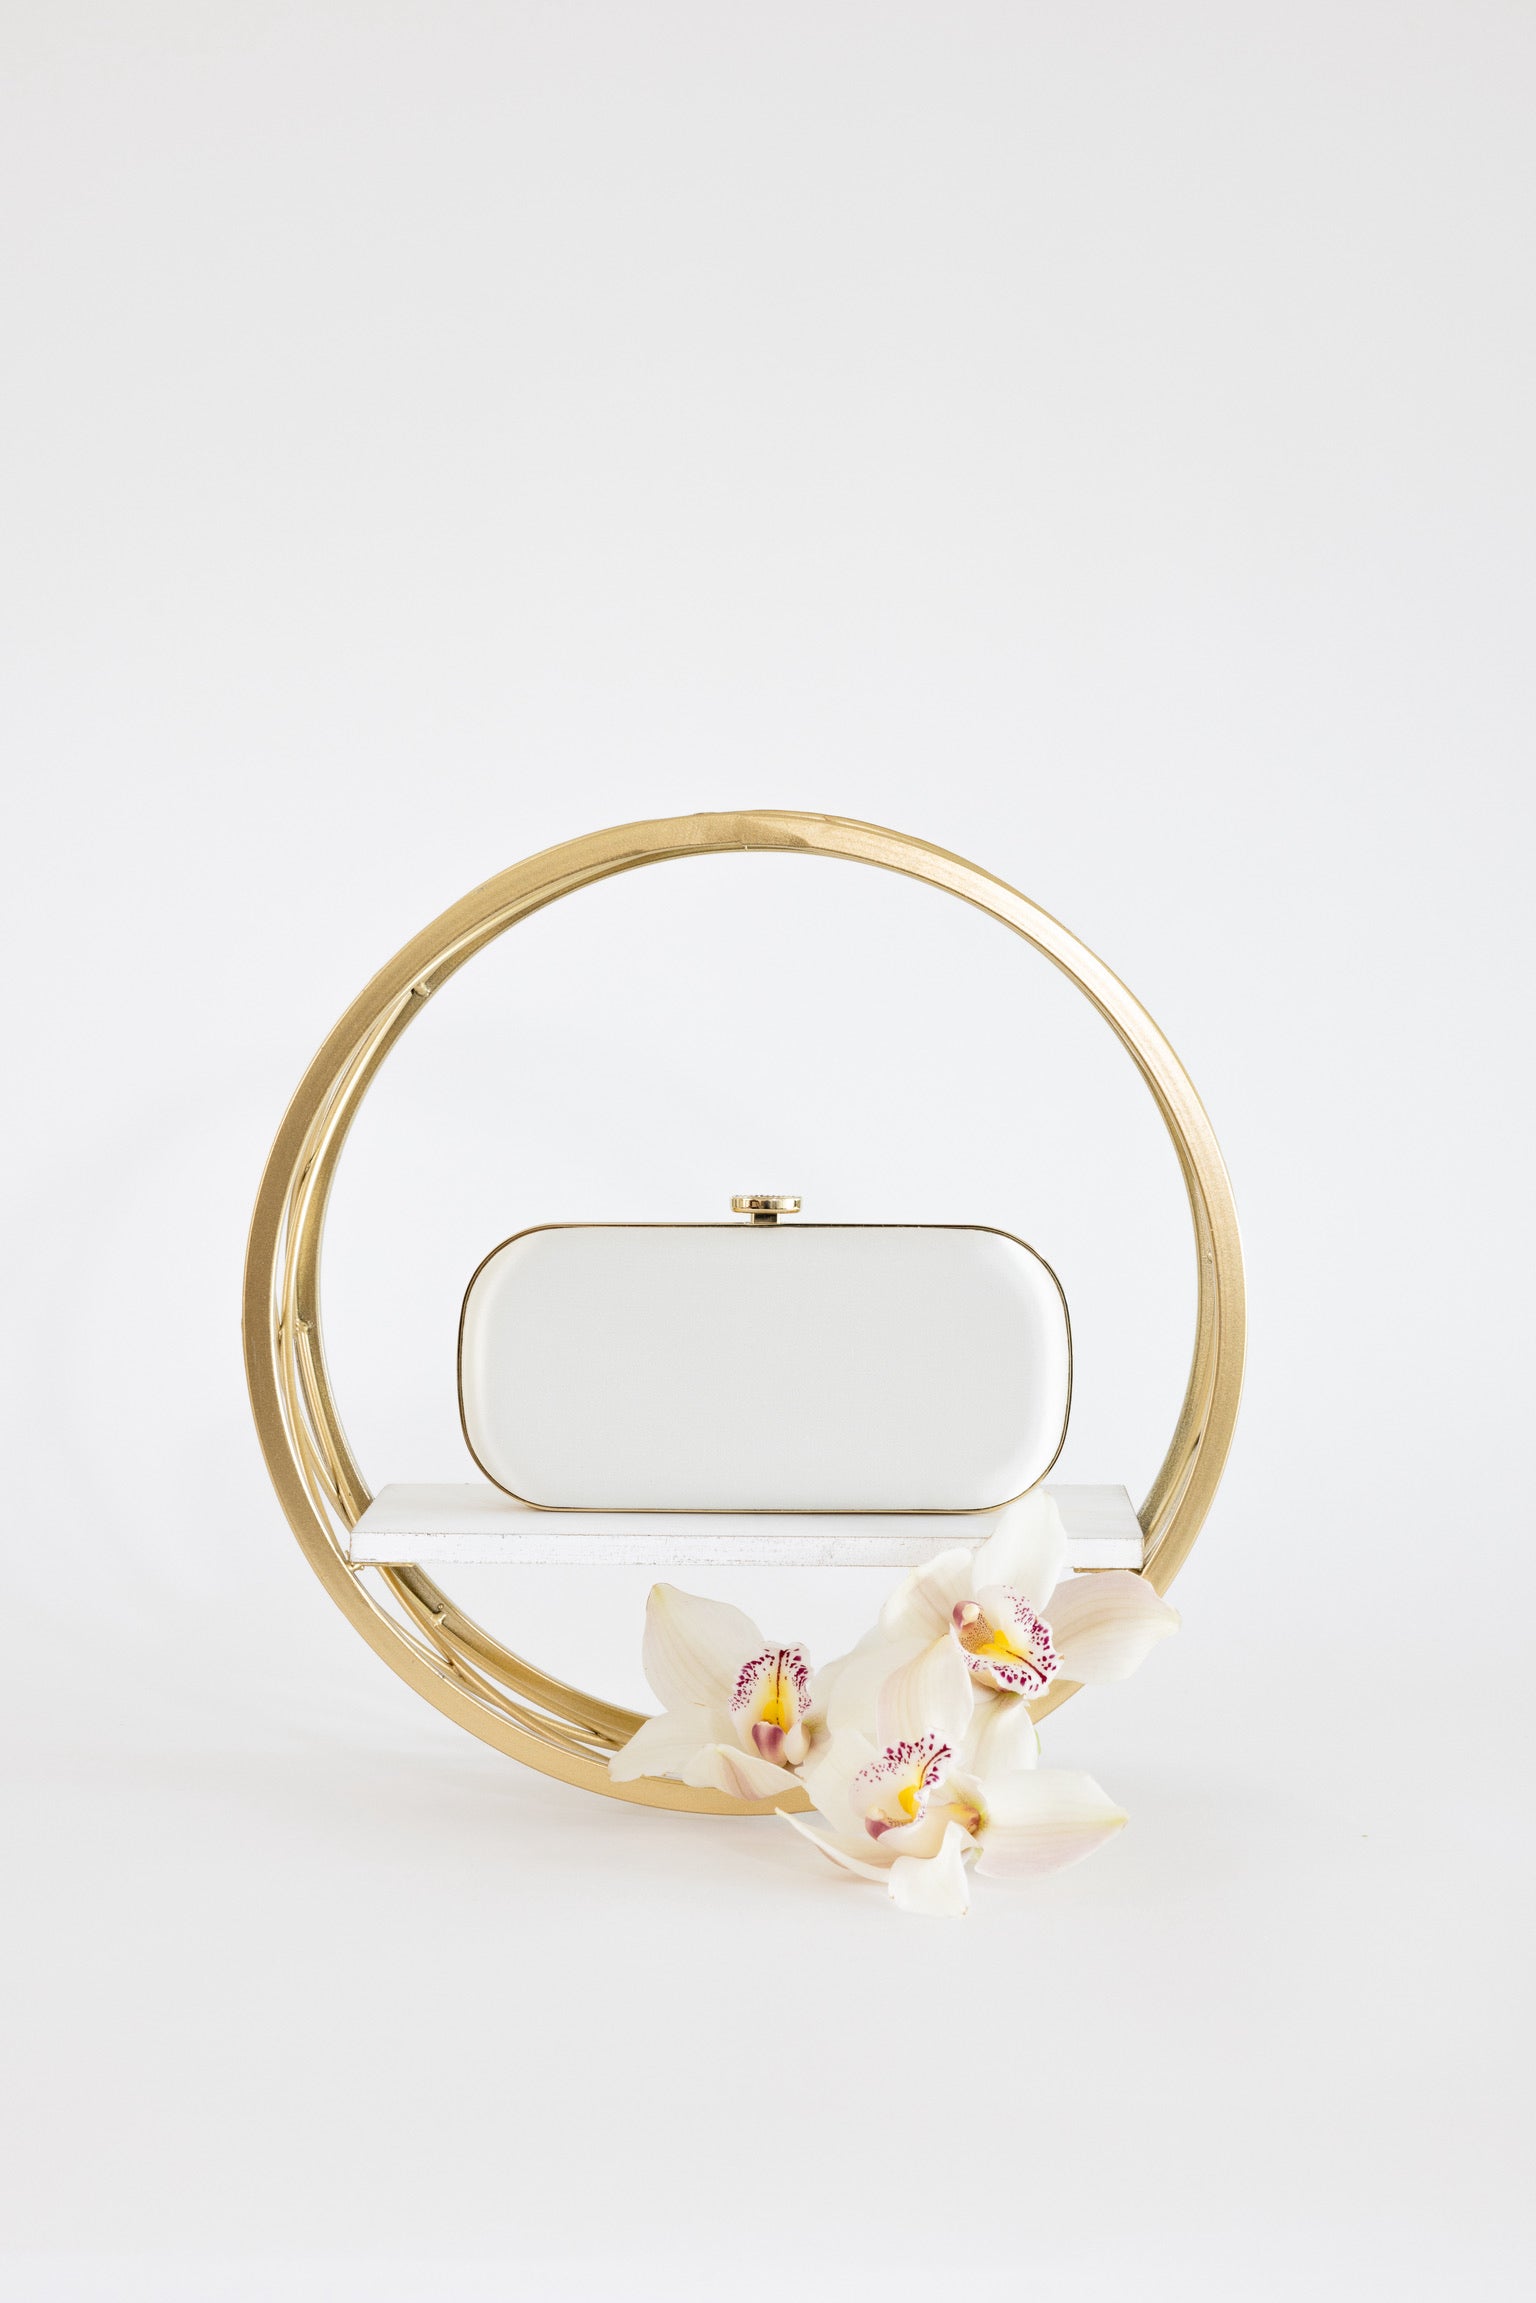 A white clutch purse displayed within a golden circular frame, accented by white orchids to the front, against a plain white background.